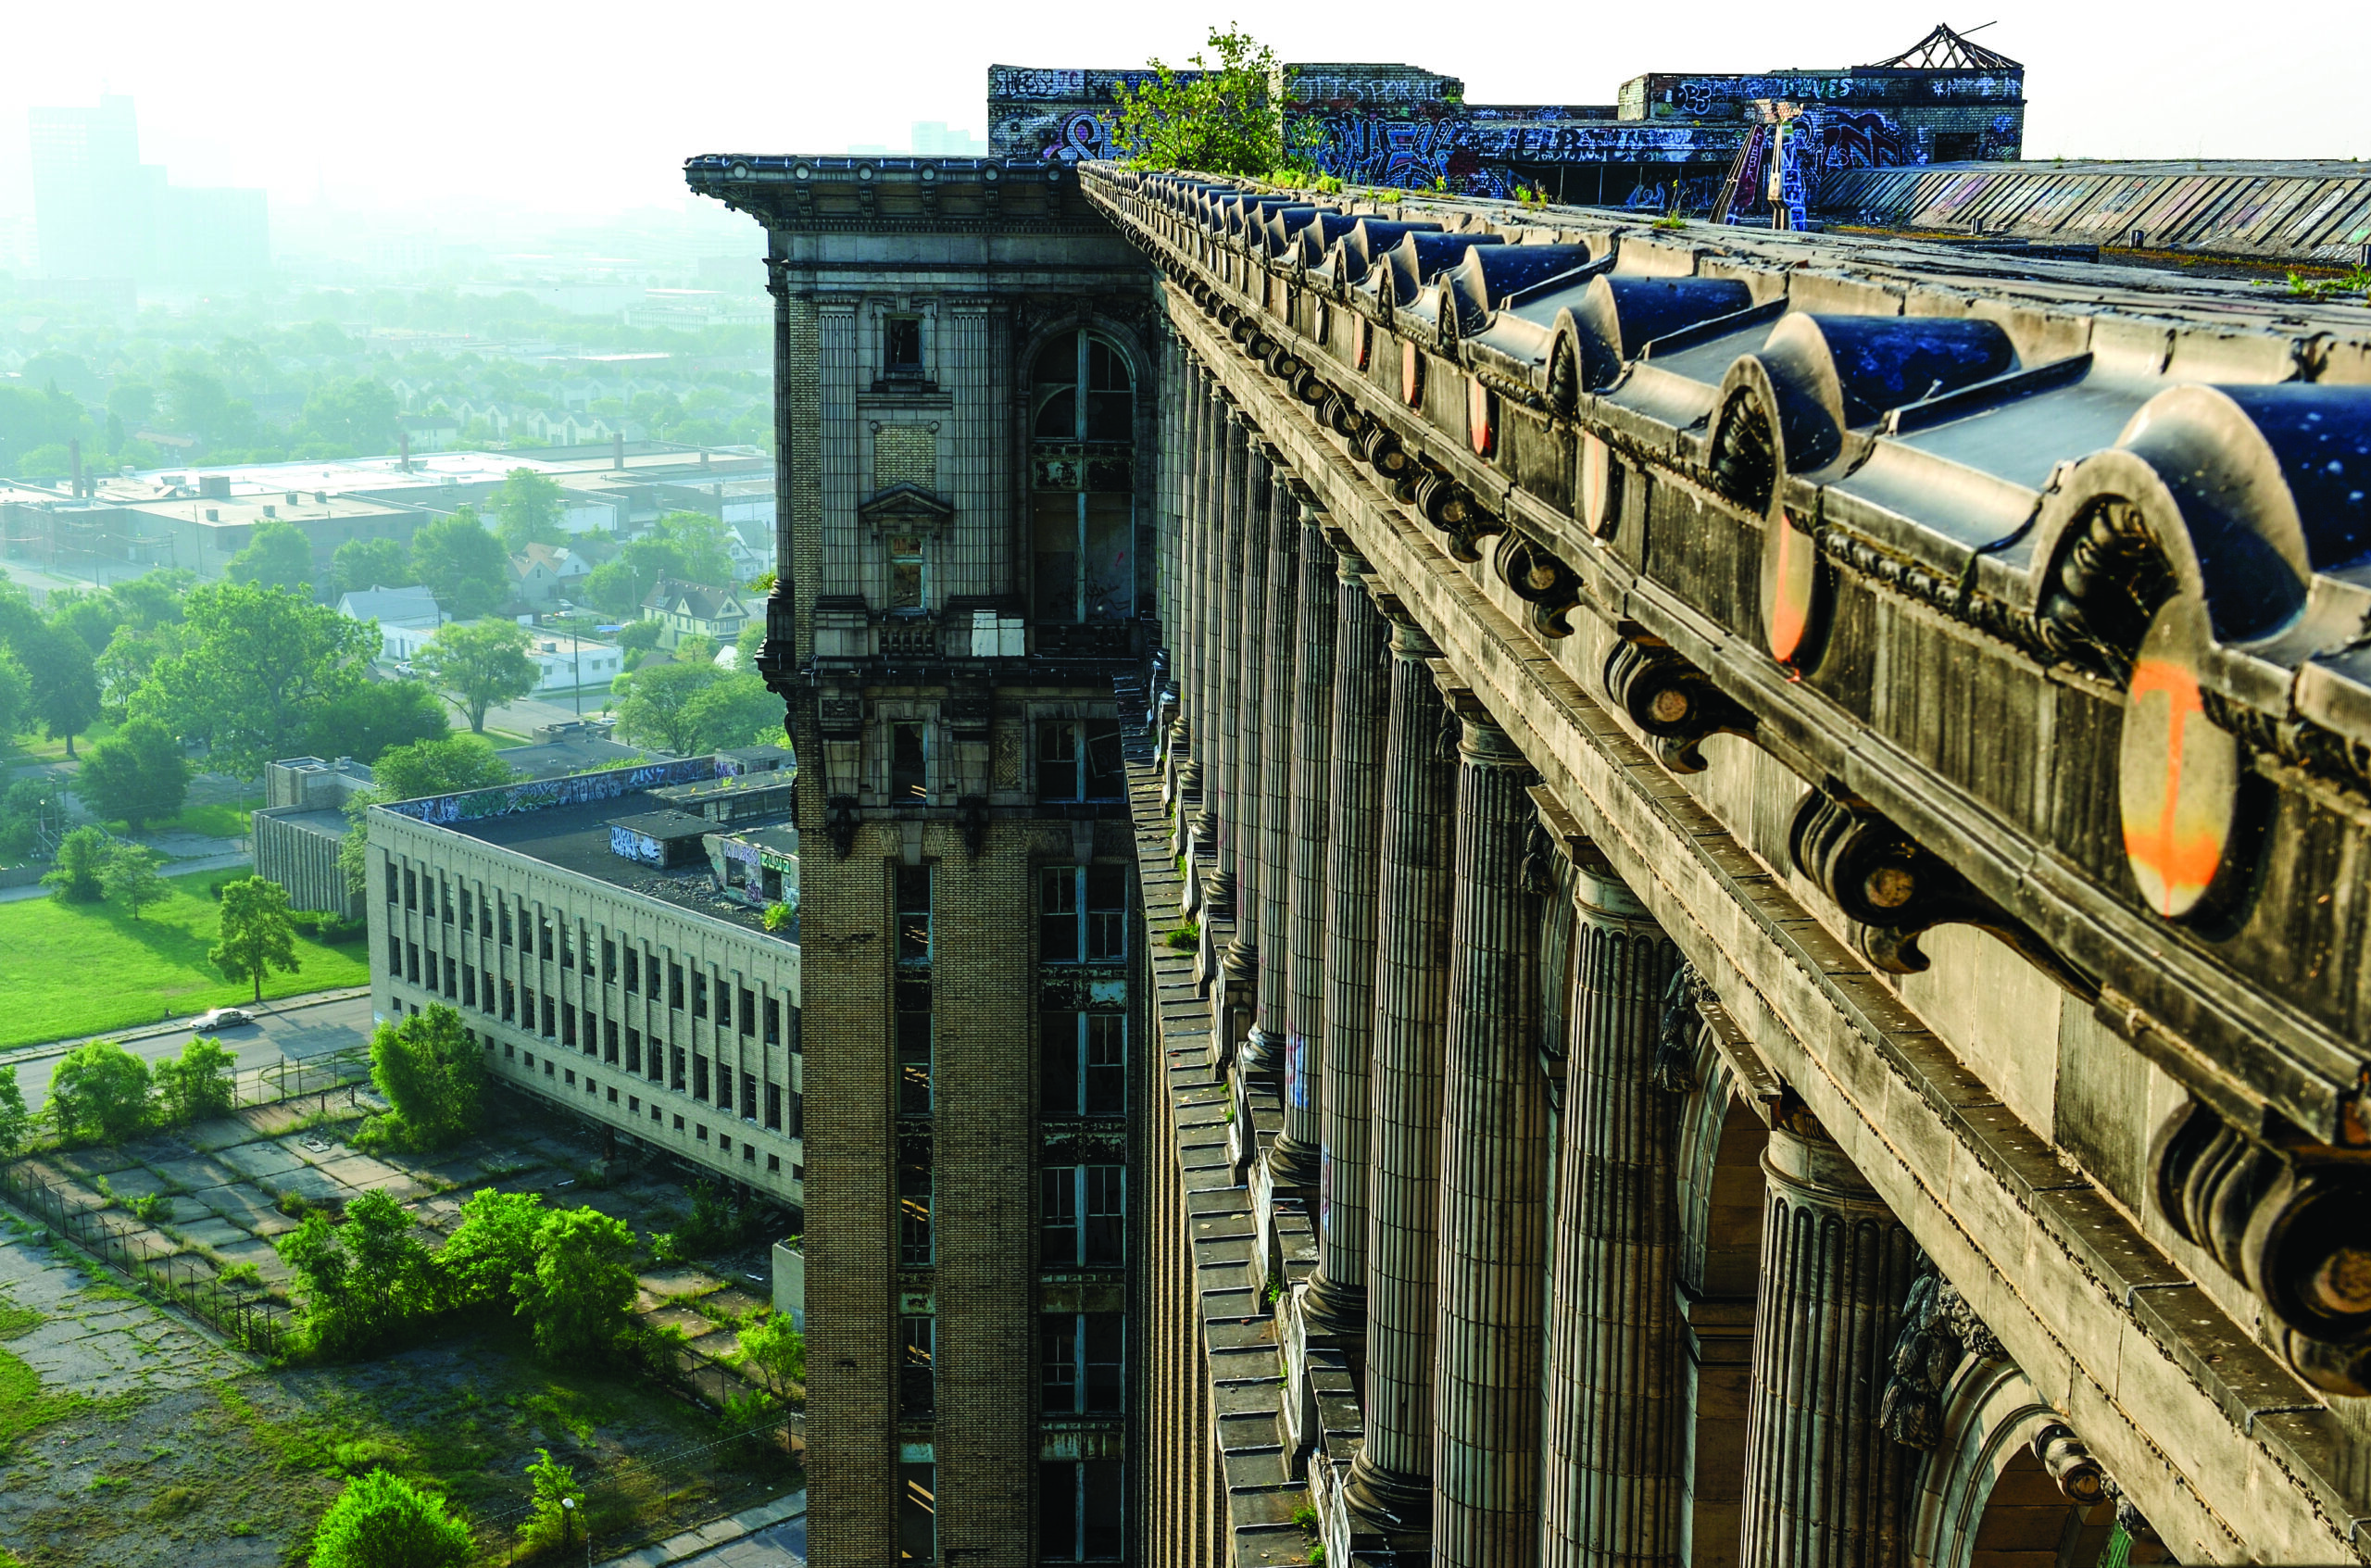 A picture of the roof line of Michigan Central Station with graffiti and weeds.